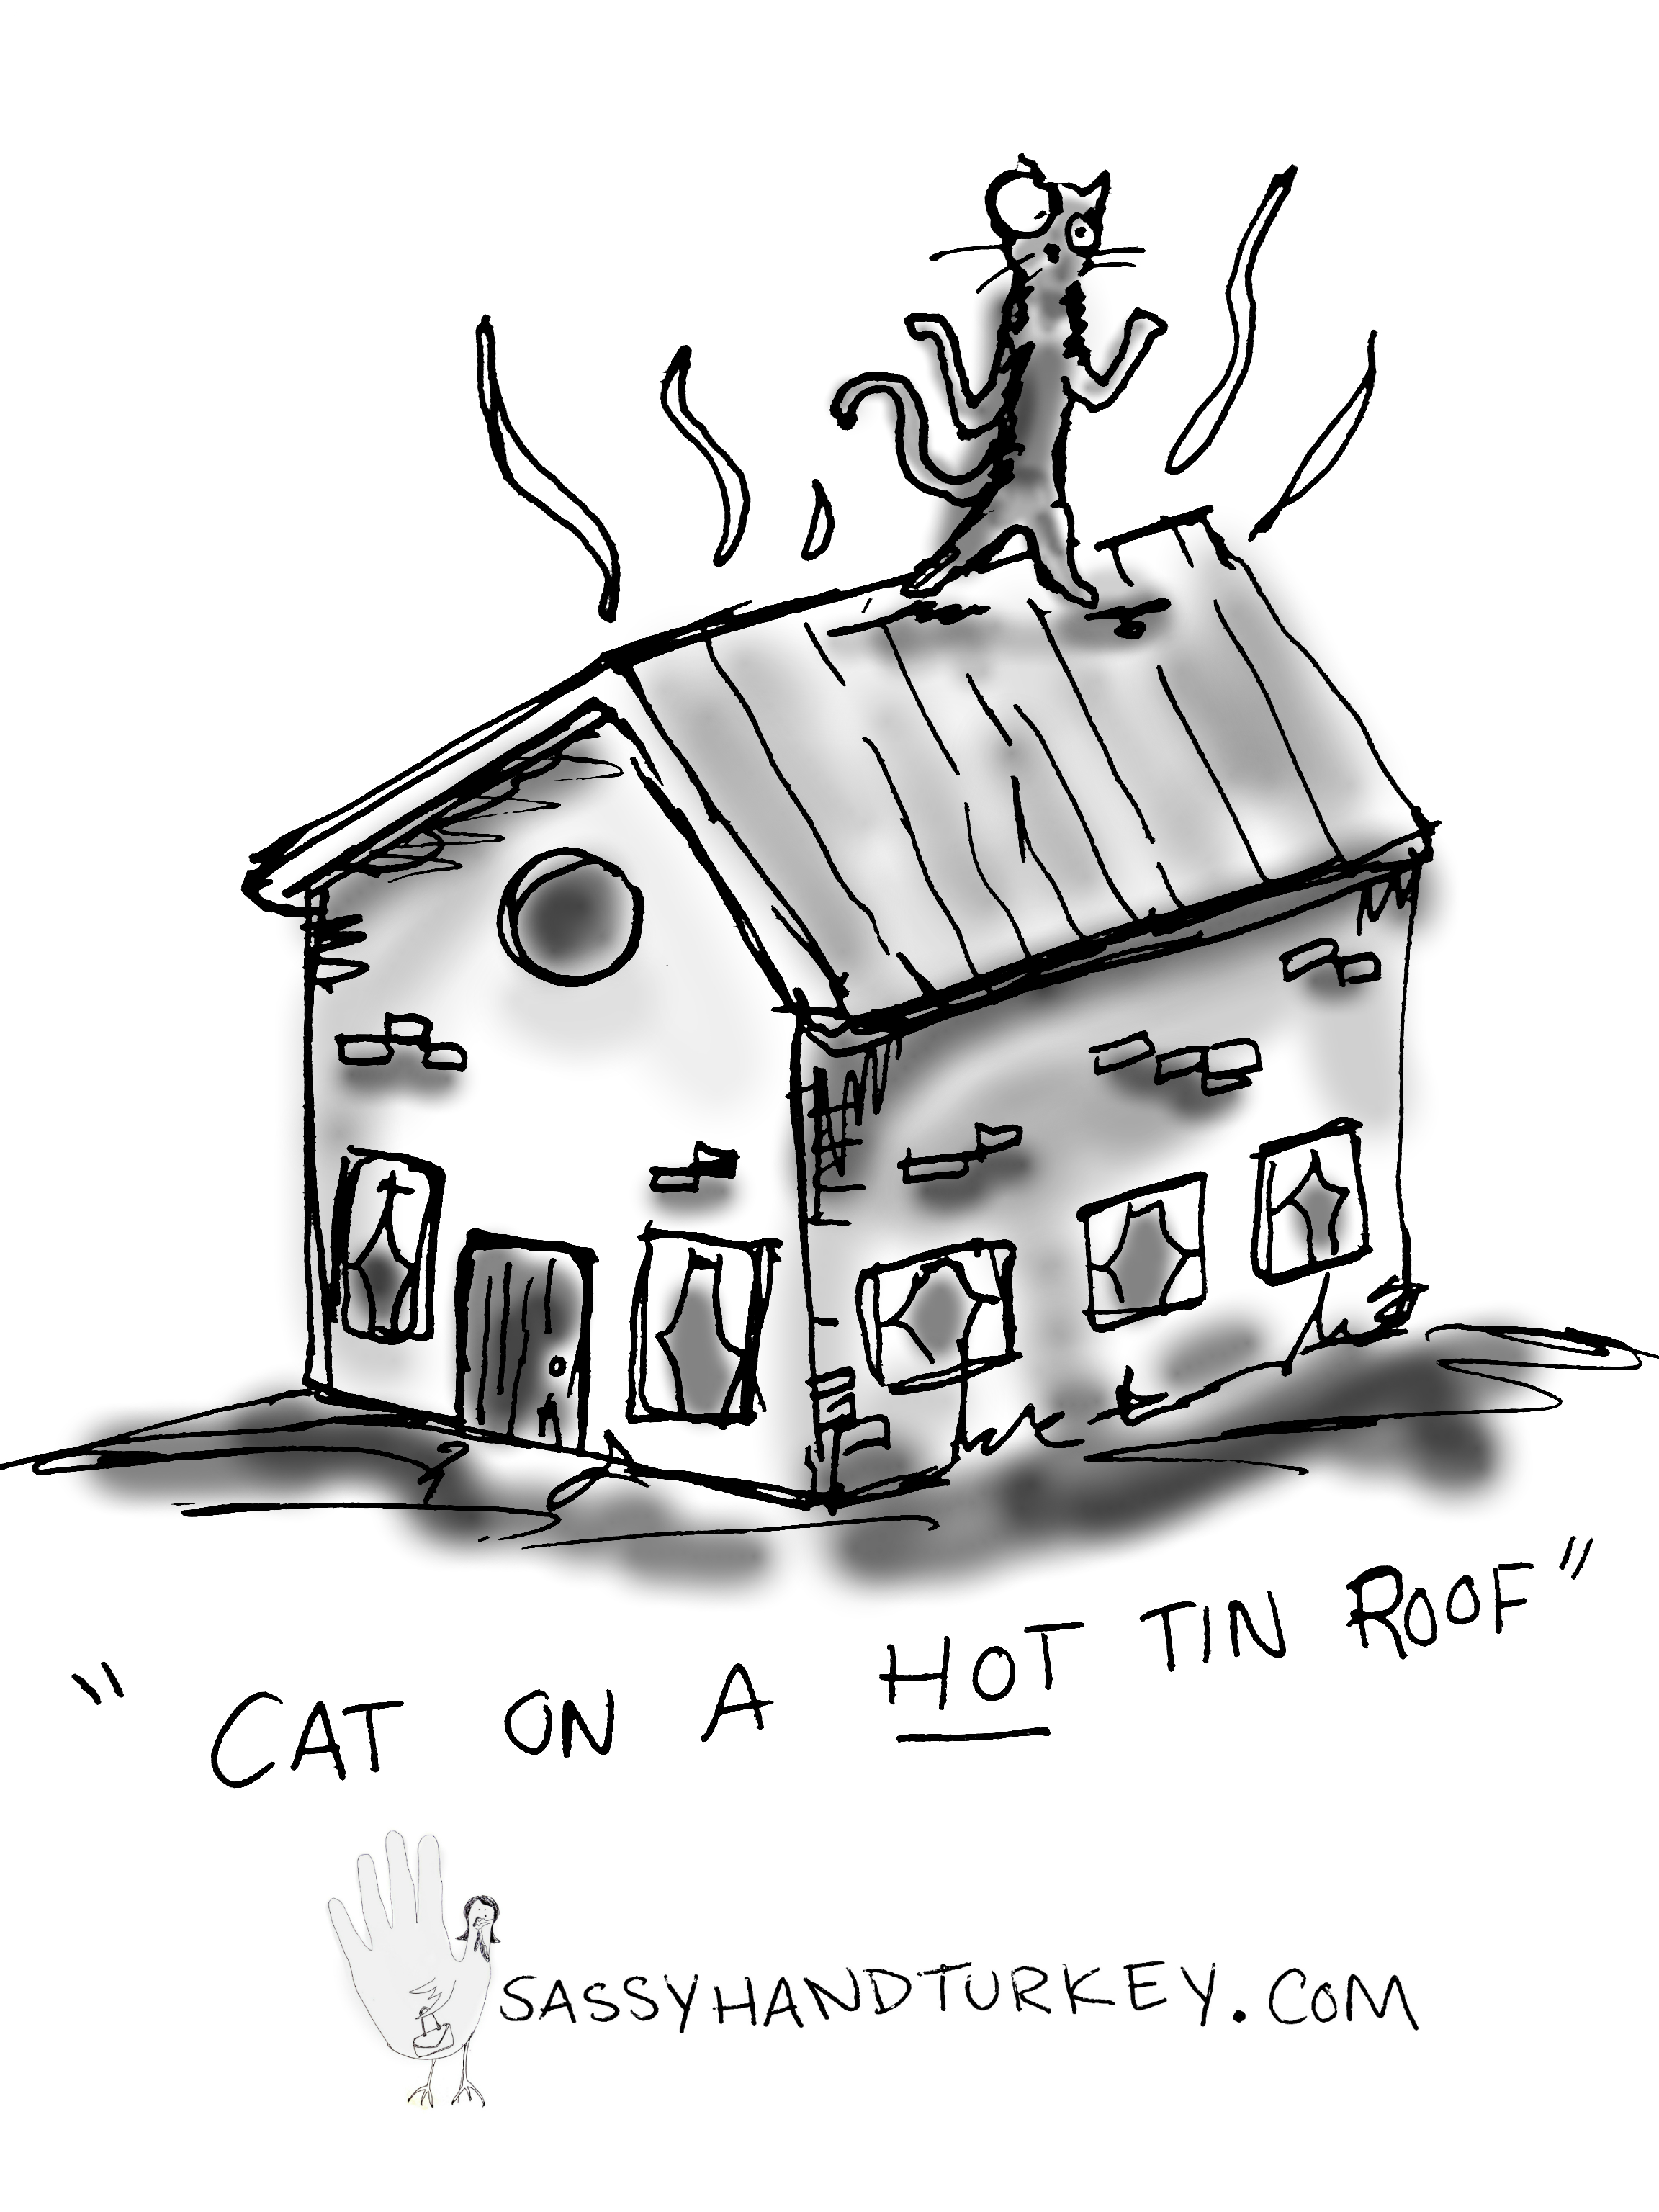 Idioms with roof. Roof идиома. Tin Roof. Like a Cat on a hot tin Roof идиома. Like a Cat on a hot tin Roof.